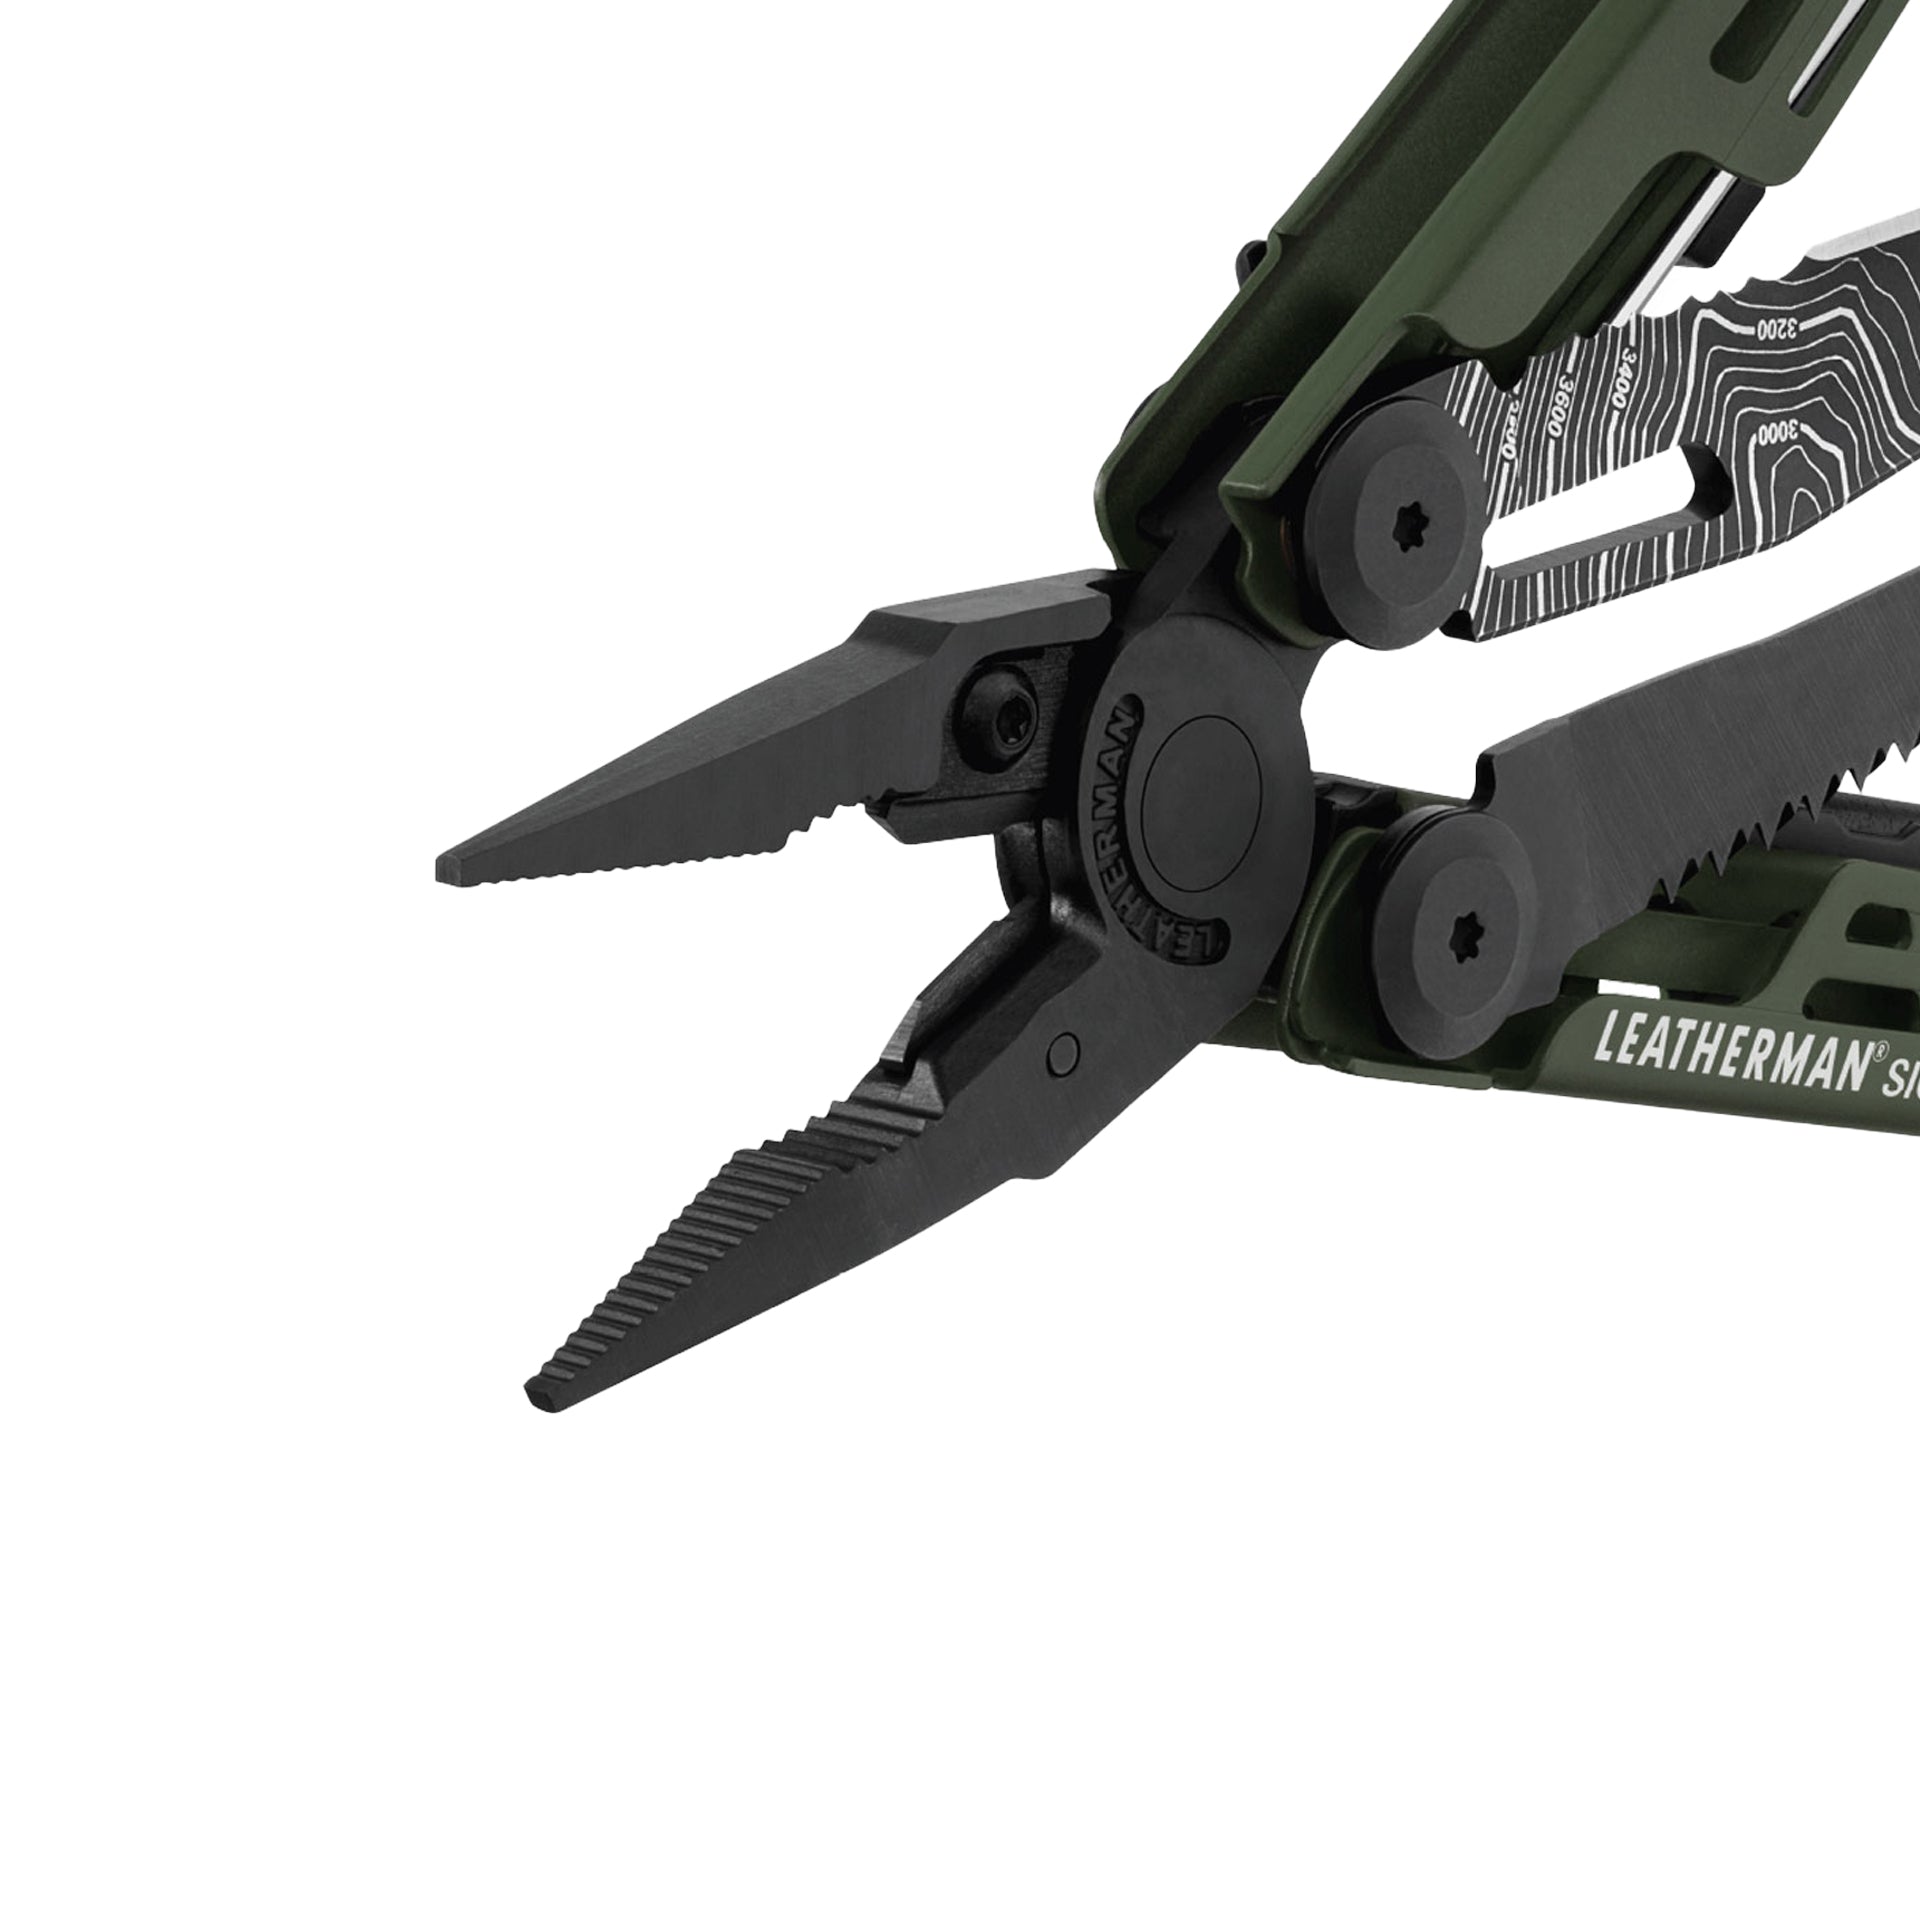 The Leatherman® Signal™ has arrived.